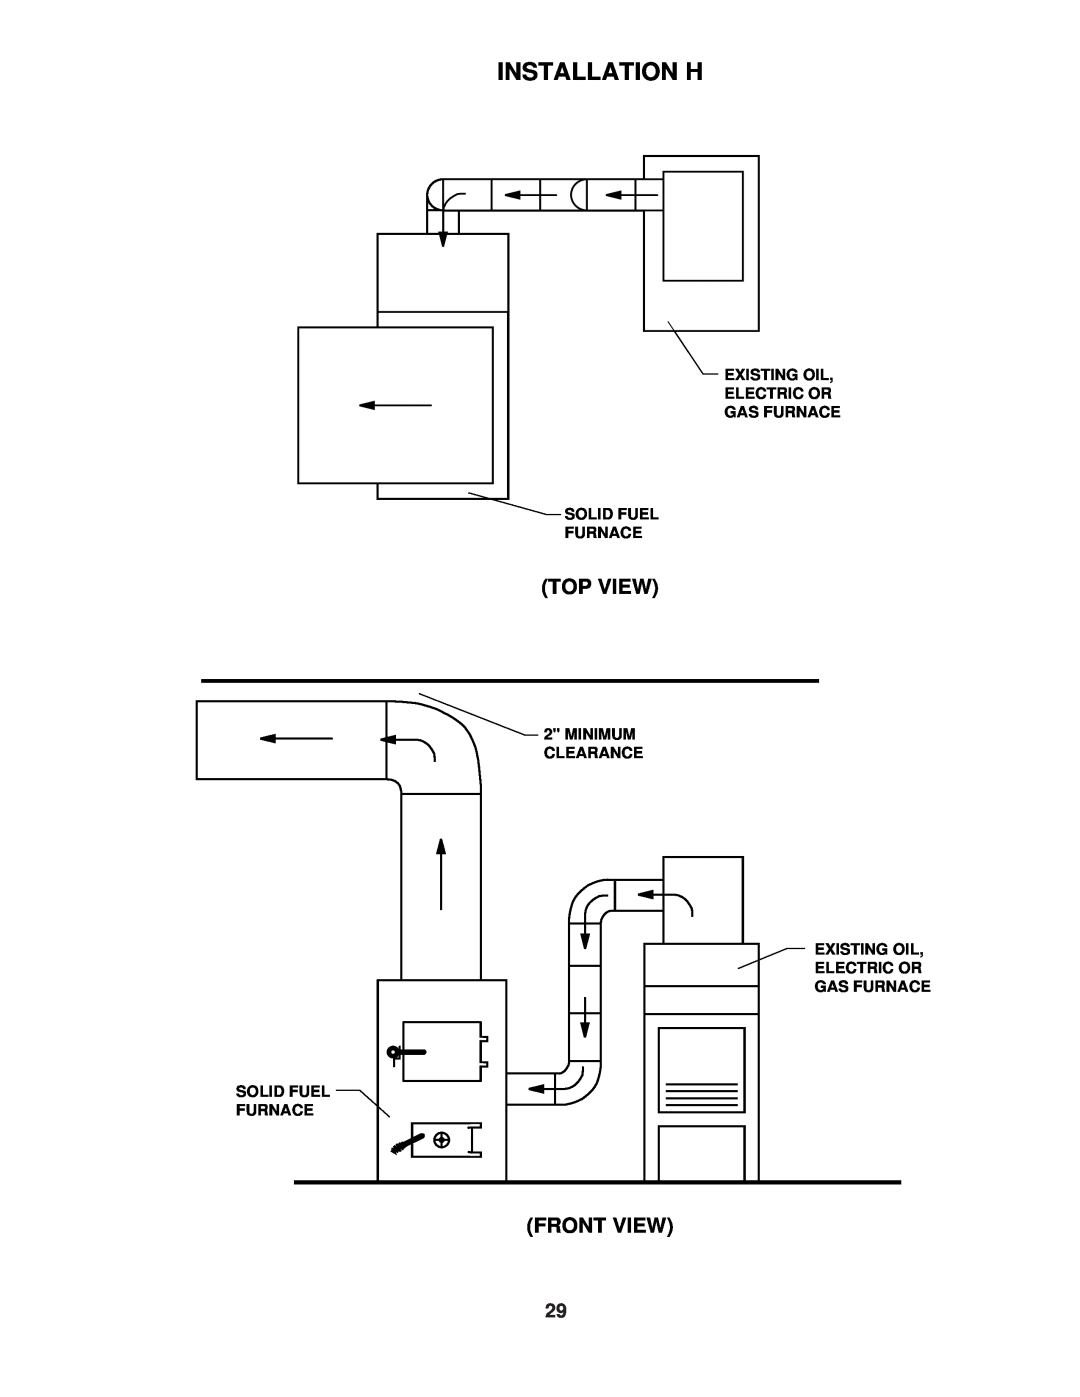 United States Stove 1537Q owner manual Installation H, Top View, Front View 